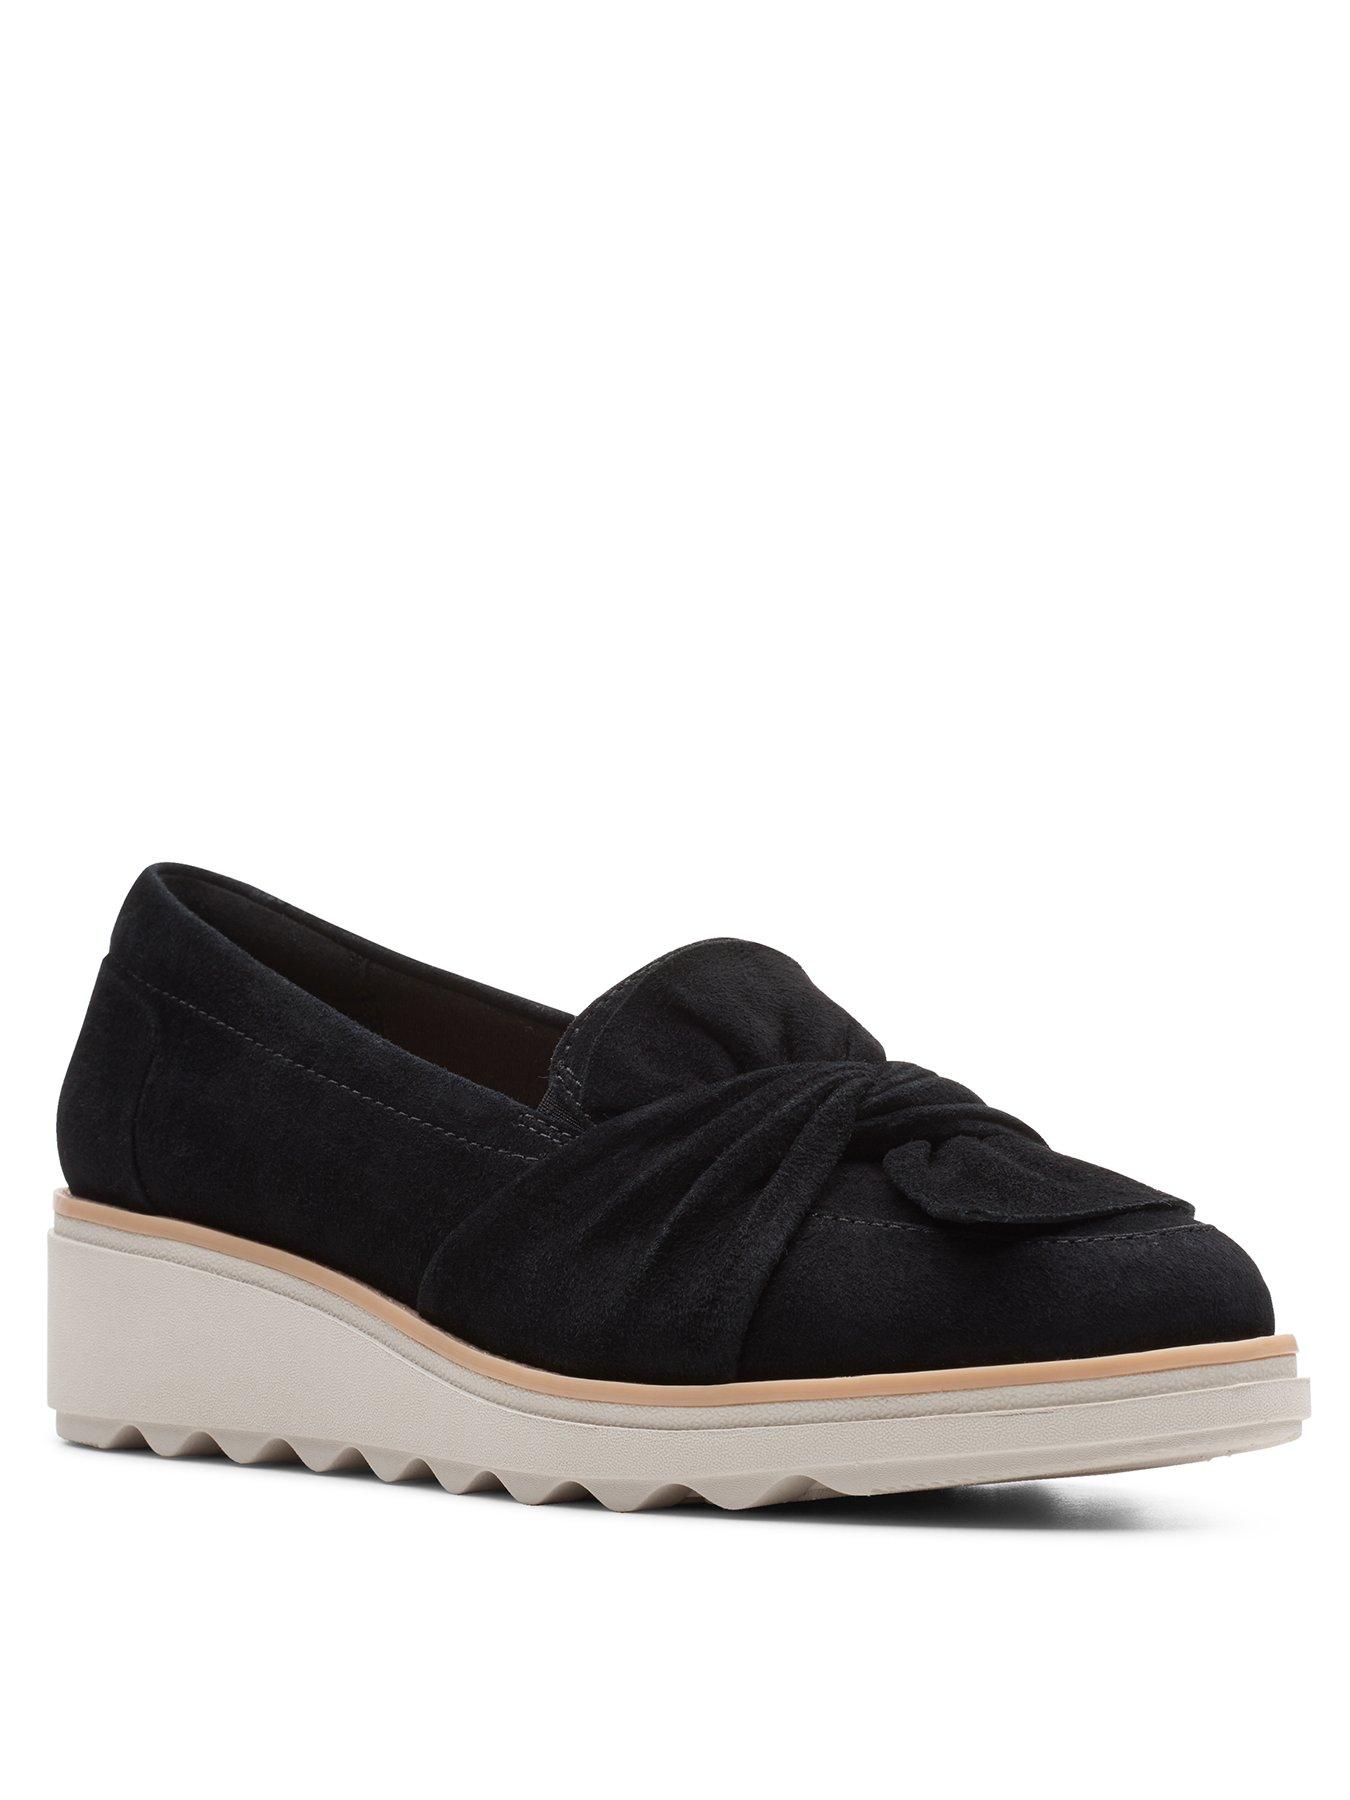 clarks sale womens loafers